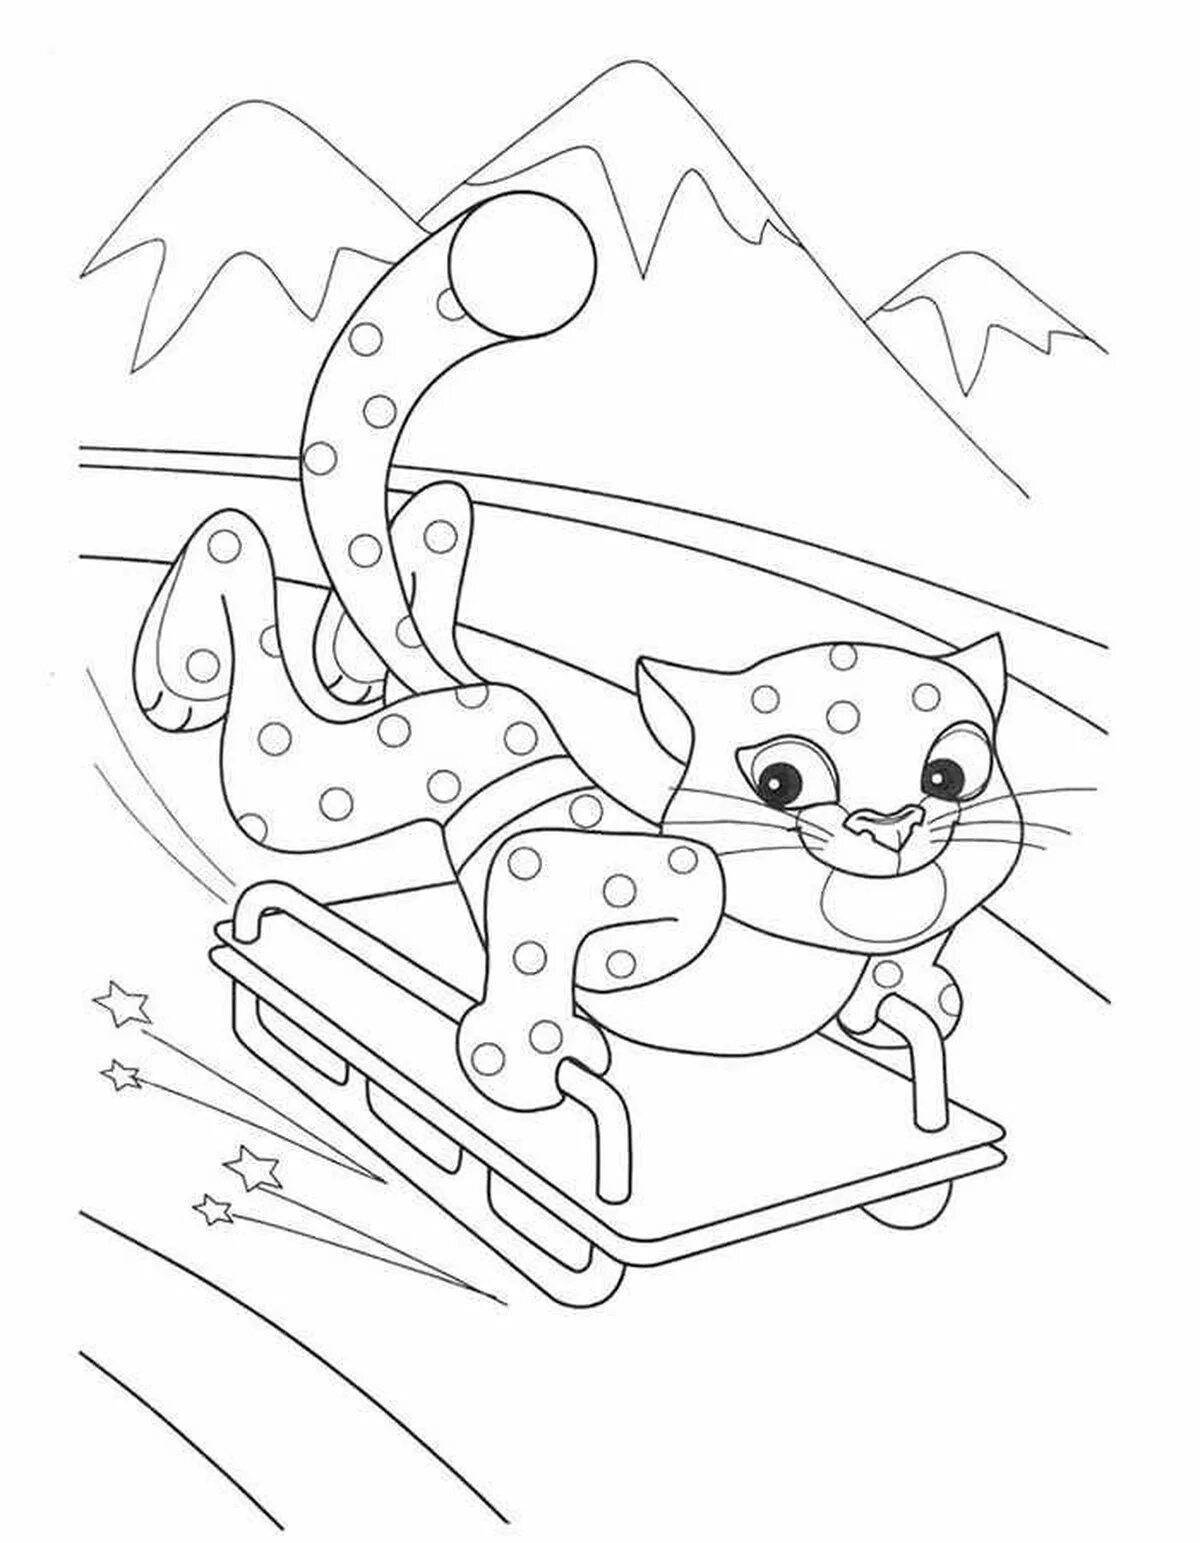 Animated sleigh coloring page